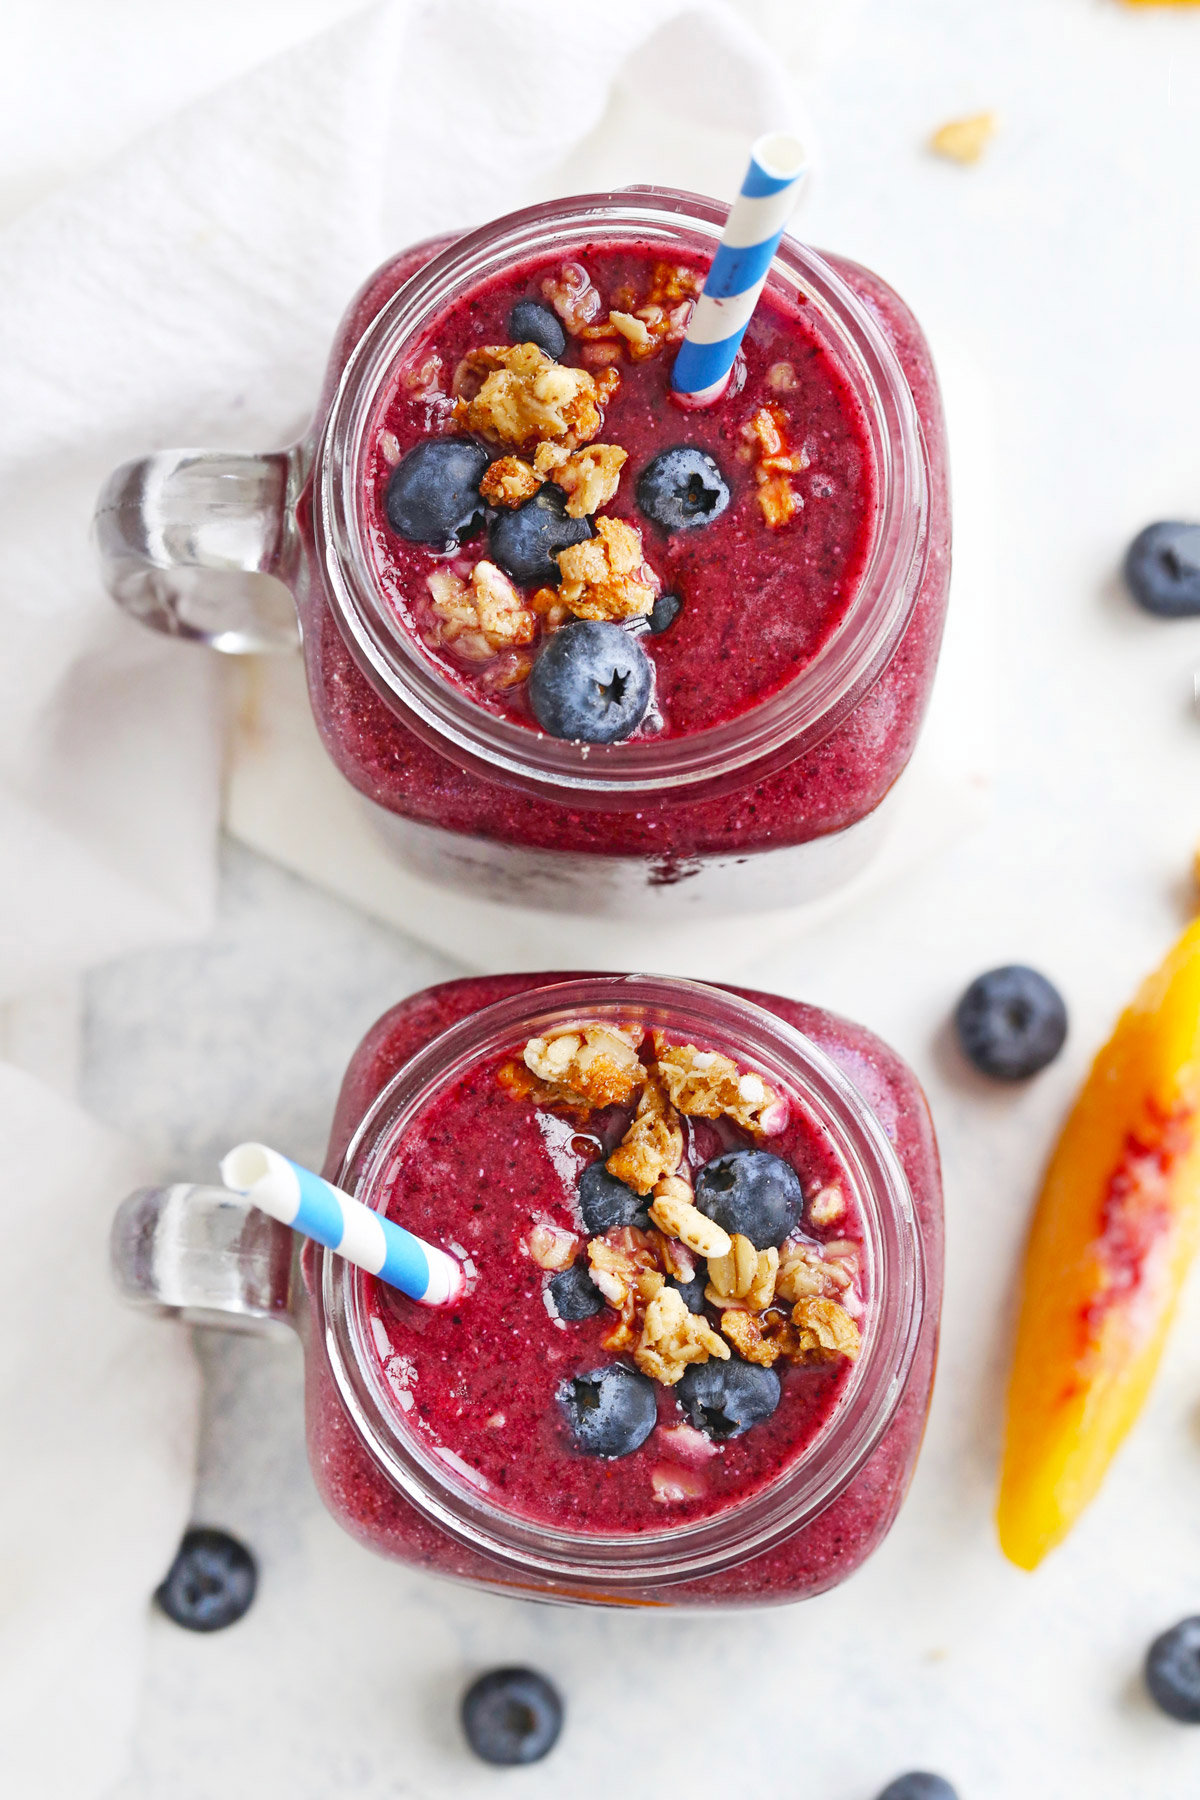 Blueberry Peach Smoothie from One Lovely Life